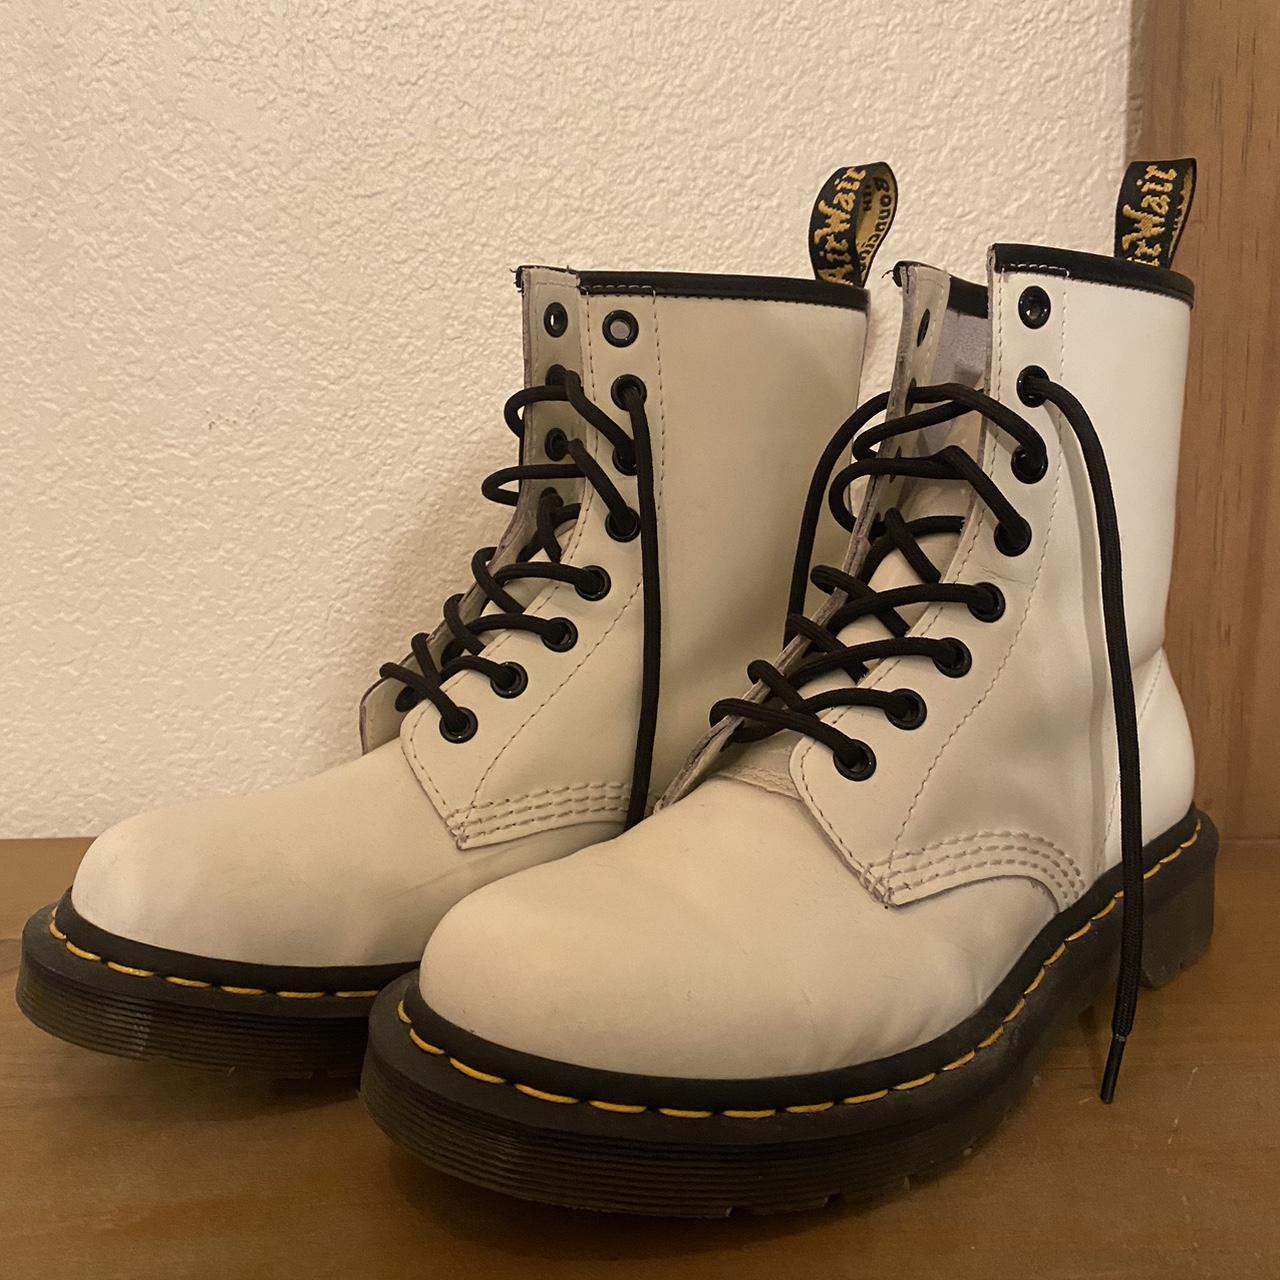 Dr. Martens Women's White and Yellow Boots